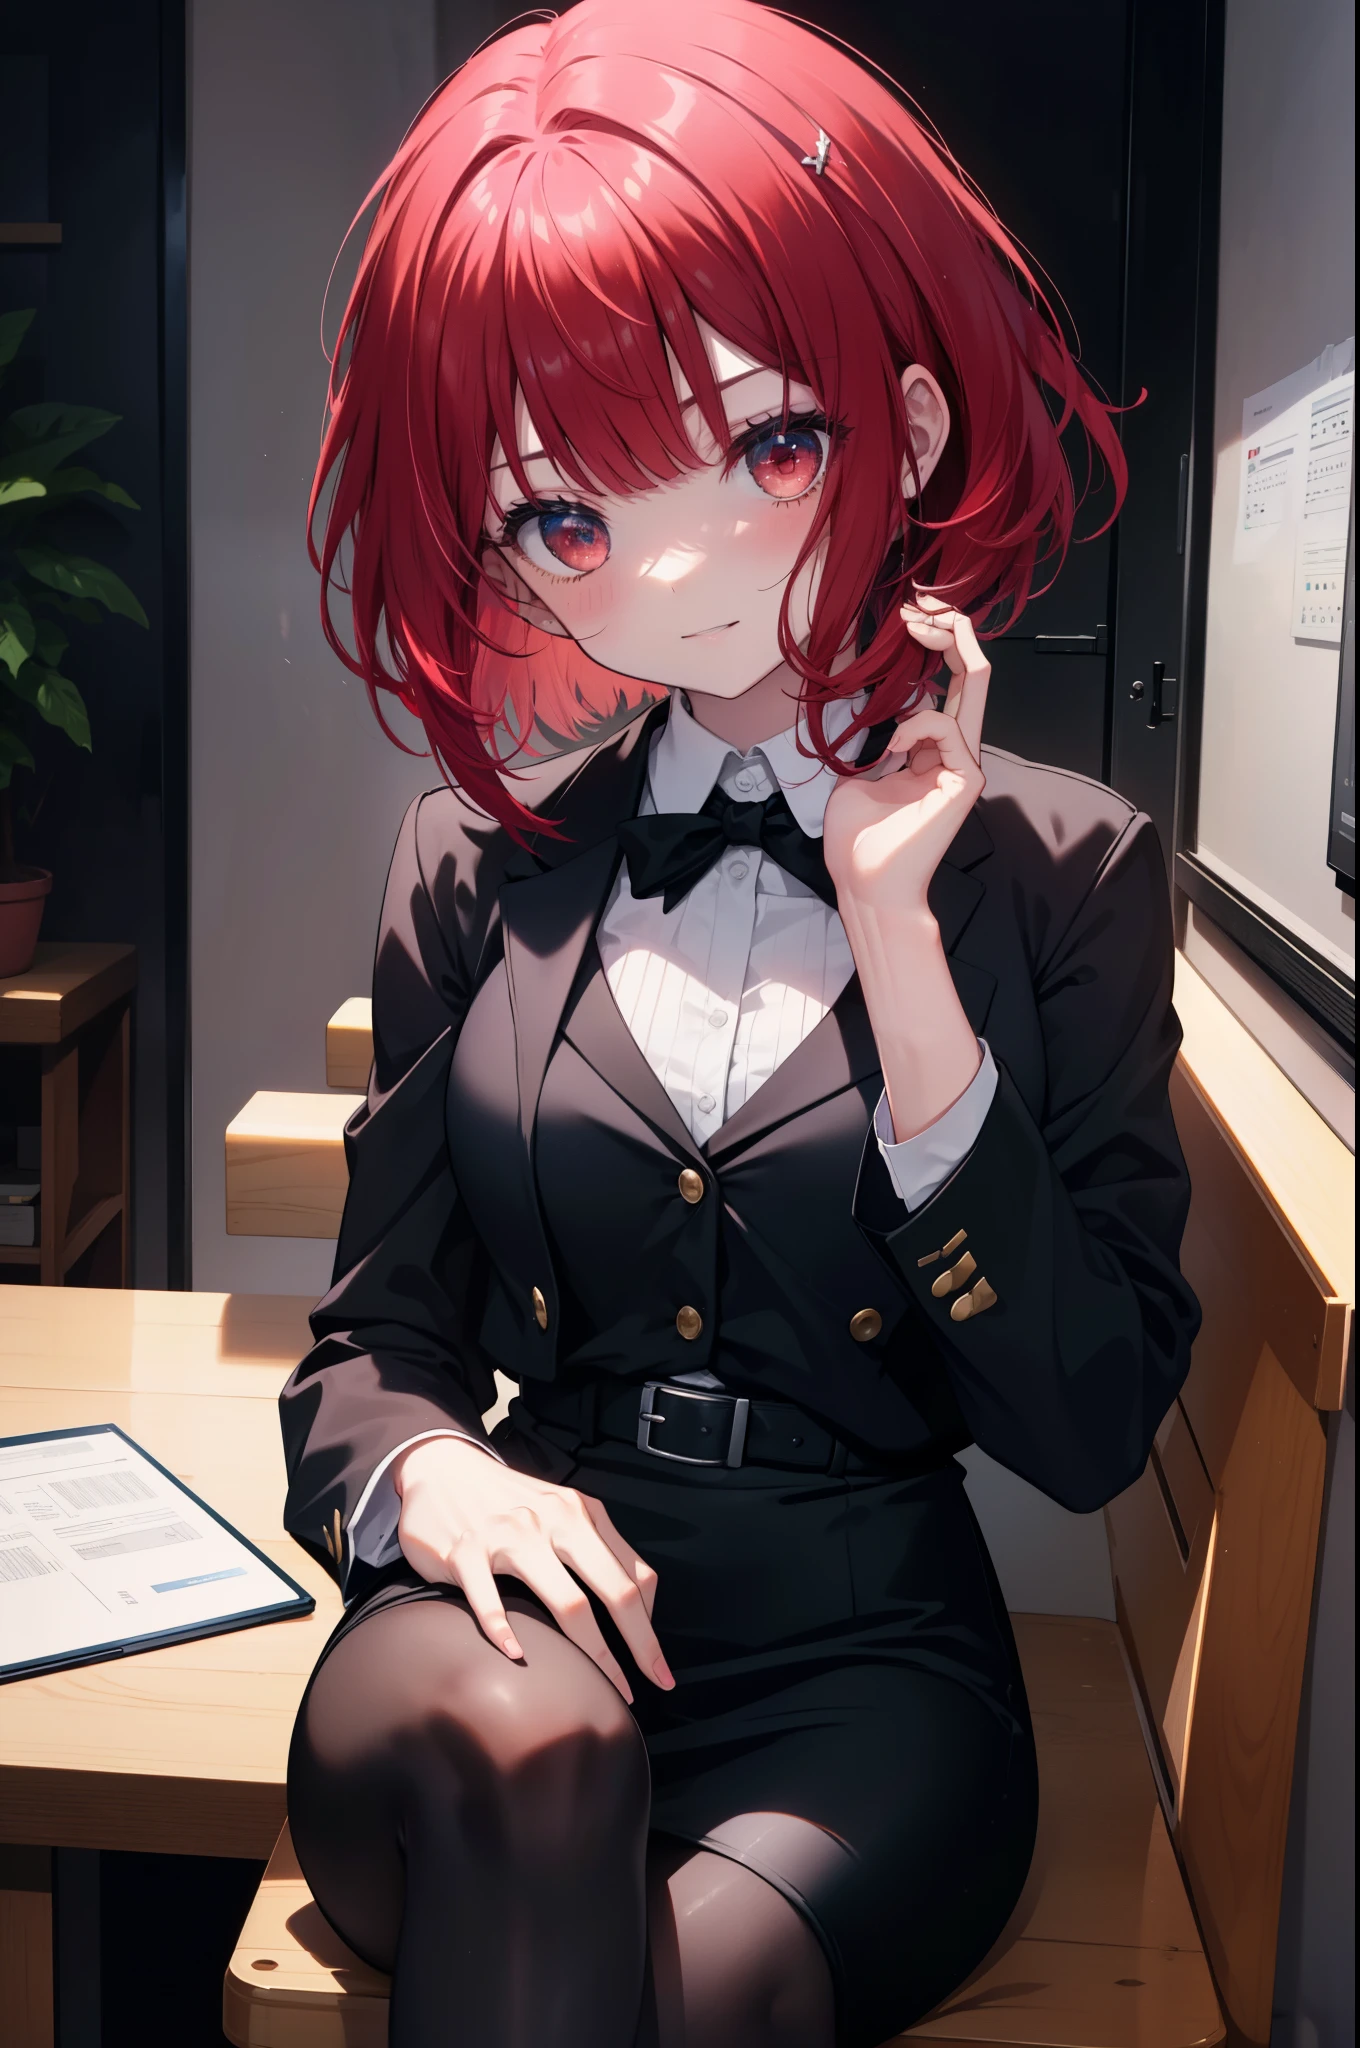 canary, when he plows, bob cut, (red eyes:1.5), redhead, long hair,
black suit jacket, collared jacket, white dress shirt, collared shirt, neckline, button, strap, ID card on neck, black pencil skirt, black pantyhose,stiletto heels smile, blush, looking at the viewer, Charm, Mechanical,on your computer,sitting cross-legged on a chair, interior,touch typing ,
break looking at viewer,
break indoors, office,
break (masterpiece:1.2), highest quality, High resolution, unity 8k wallpaper, (figure:0.8), (detailed and beautiful eyes:1.6), highly detailed face, perfect lighting, Very detailed CG, (perfect hands, perfect anatomy),